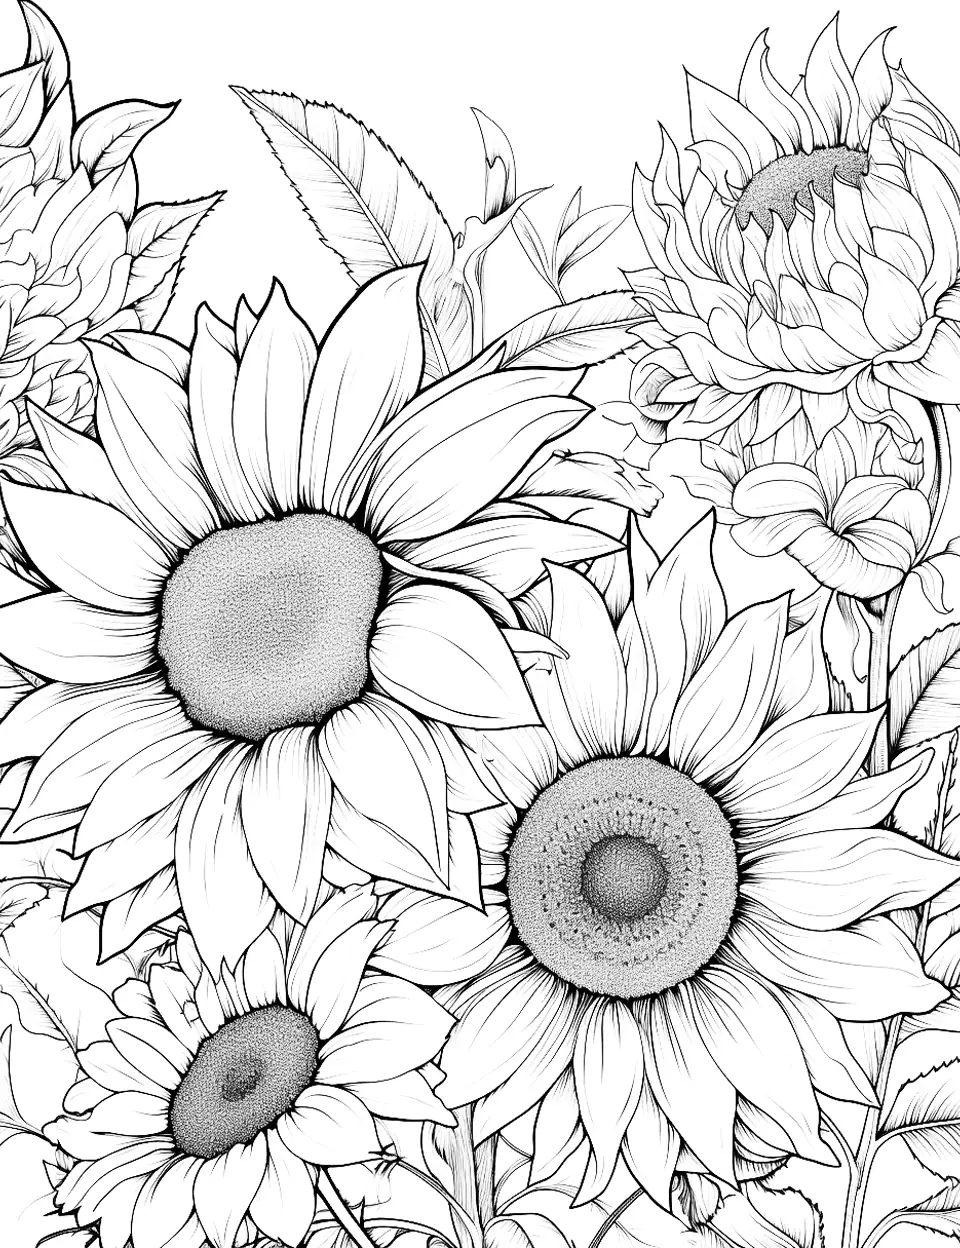 Summer Solstice Adult Coloring Page - Sunflowers and daisies basking in the sun.